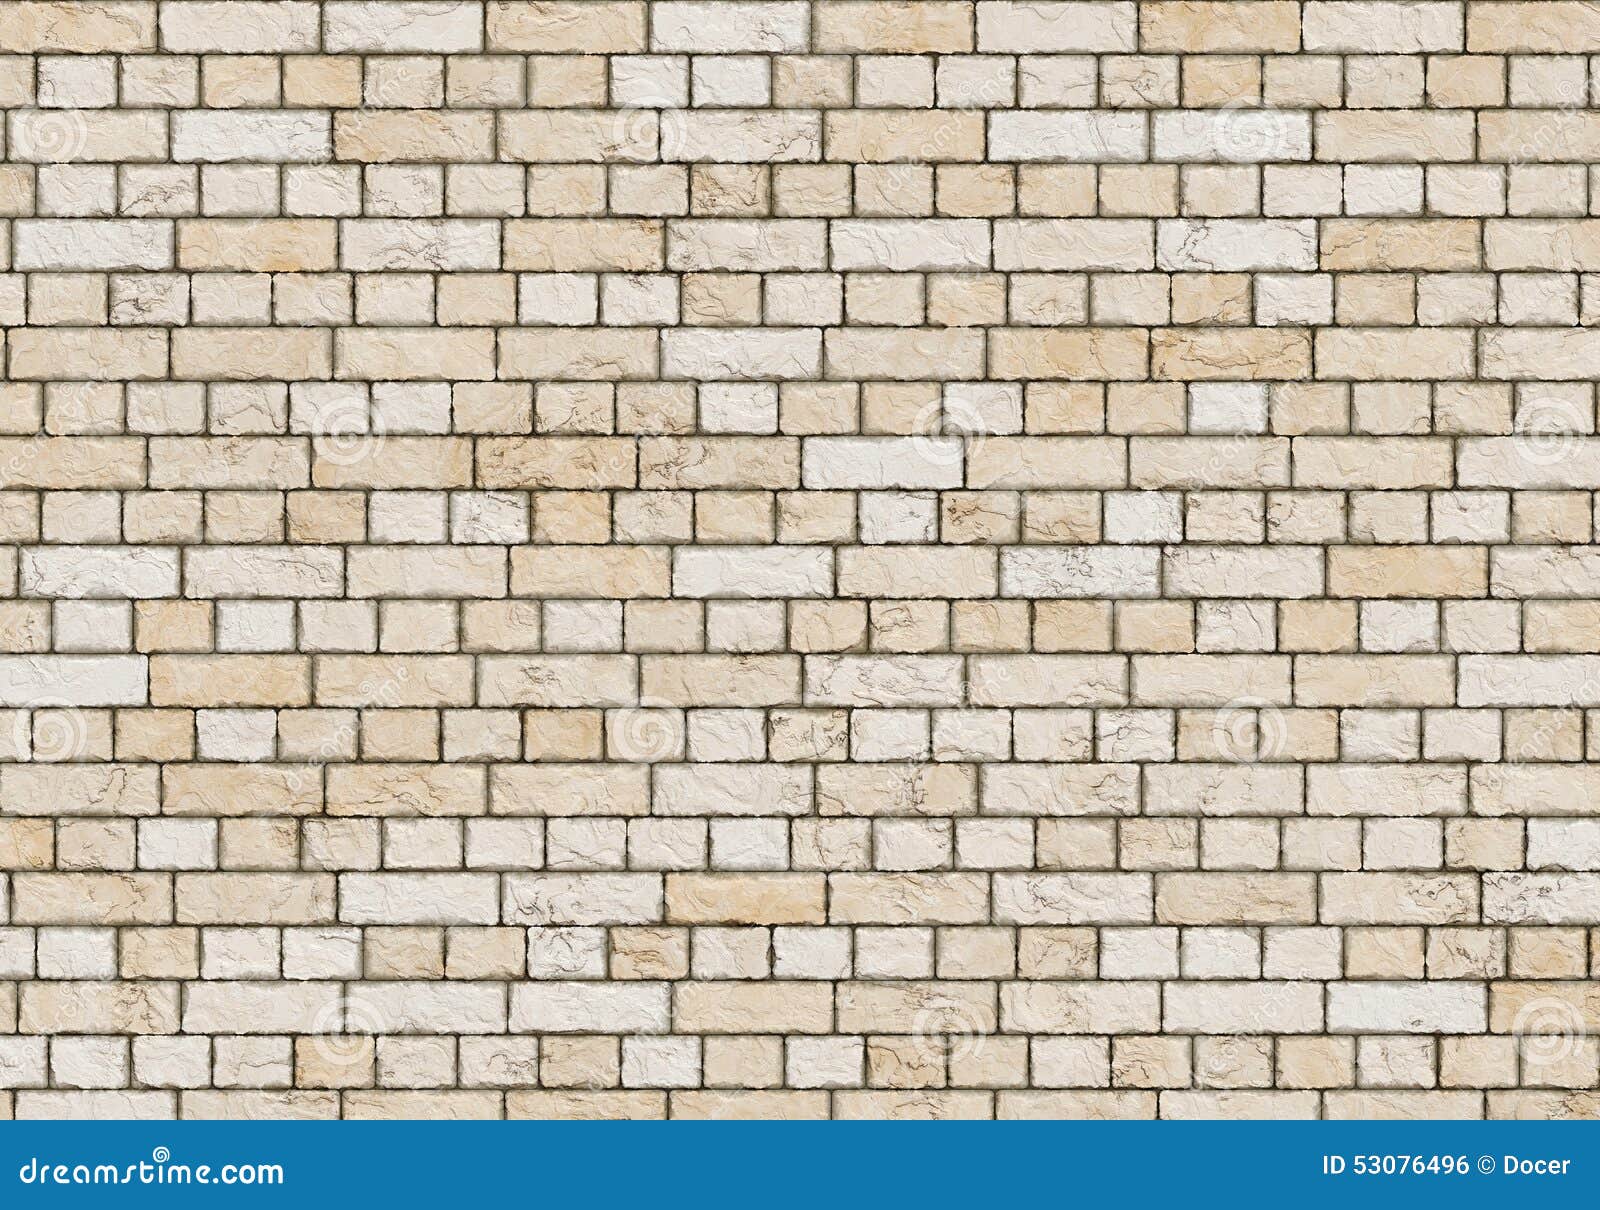 Vintage Old Antique Brick Wall Backgrounds Stock Photo - Image of